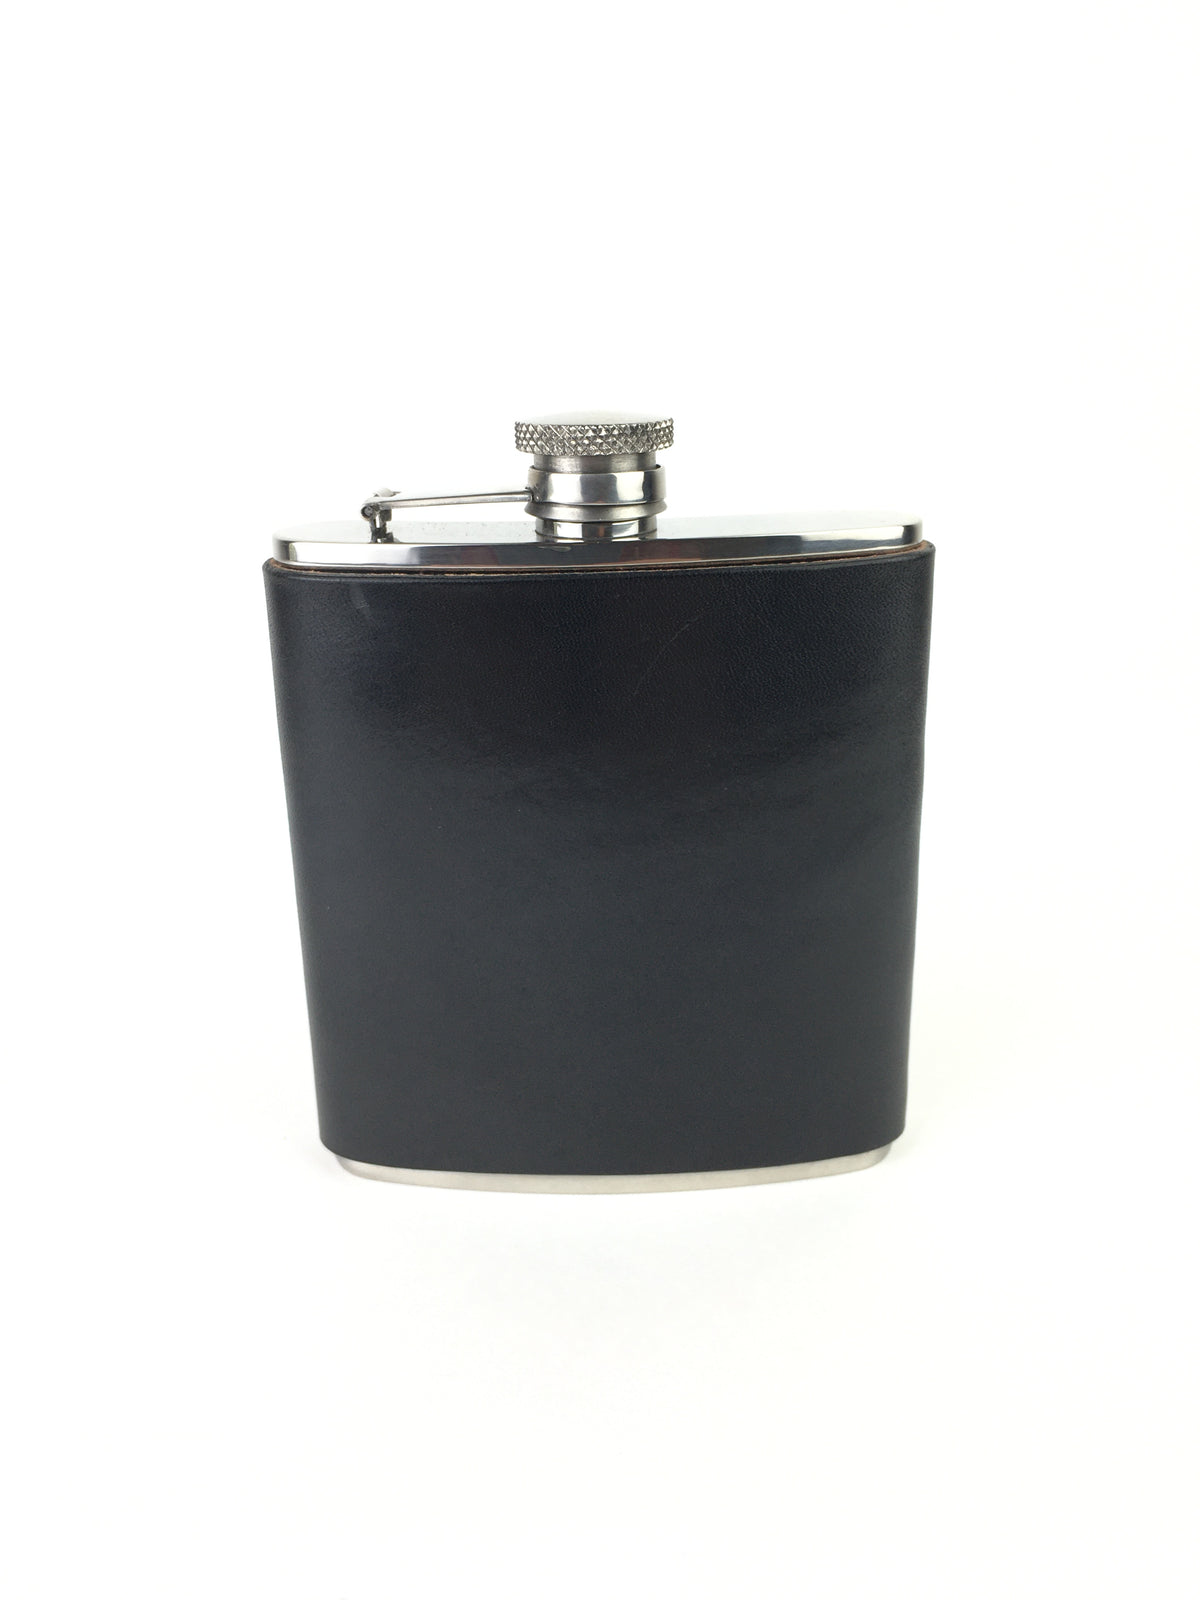 H+B WHISKY FLASK | BLACK LEATHER